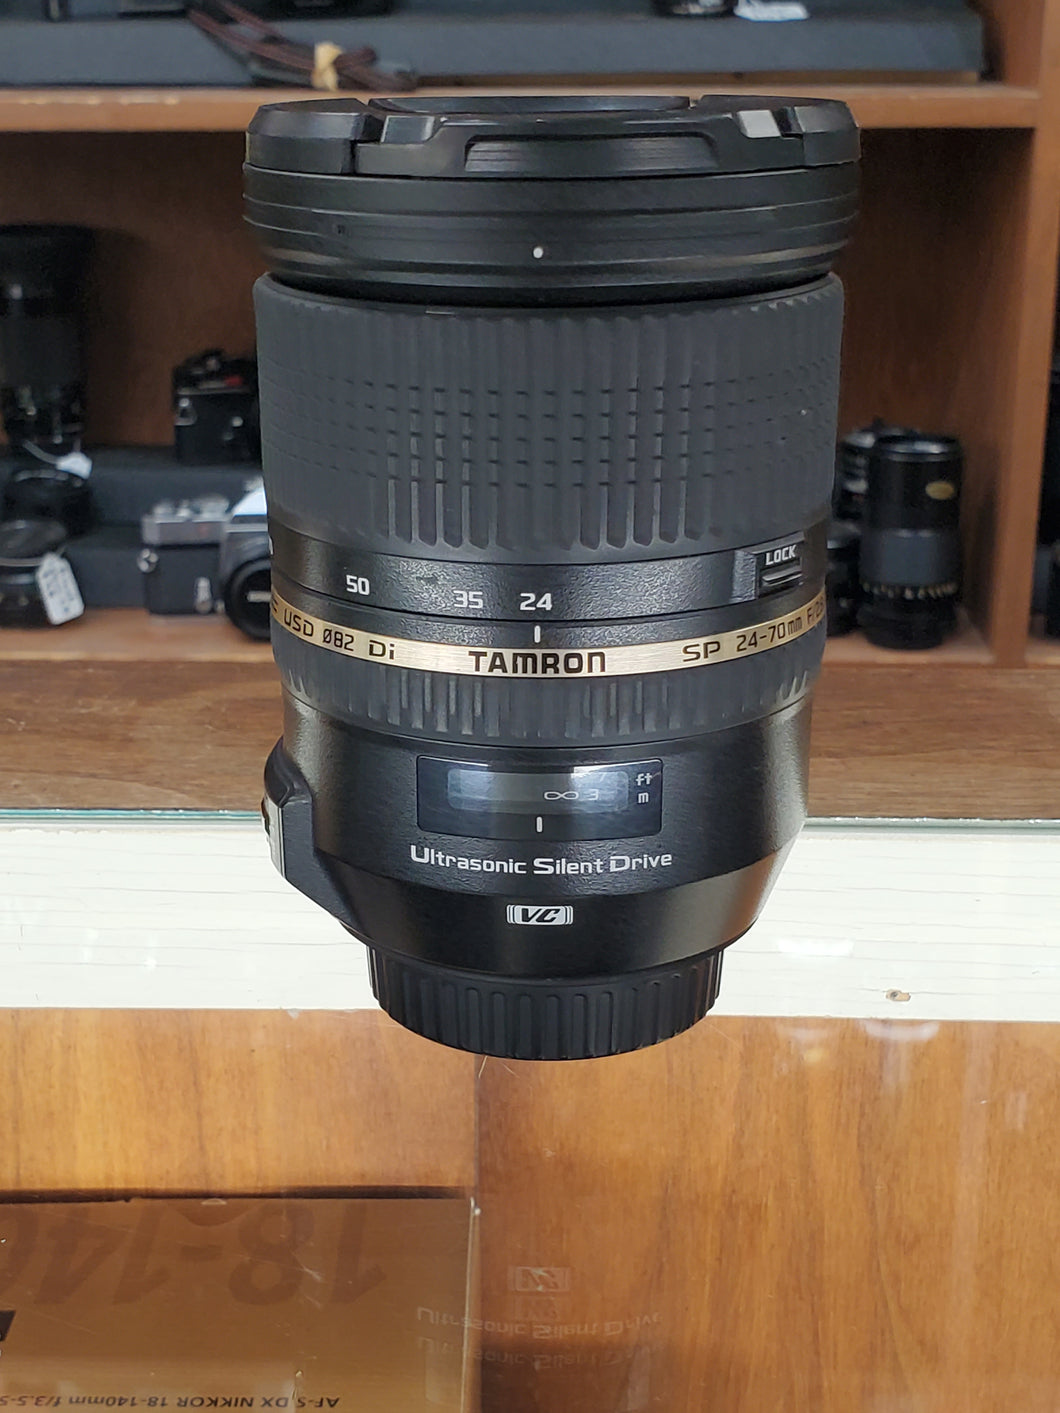 Tamron 24-70mm F/2.8 Di VC USD SP Lens for Canon EF, Excellent Condition, Canada